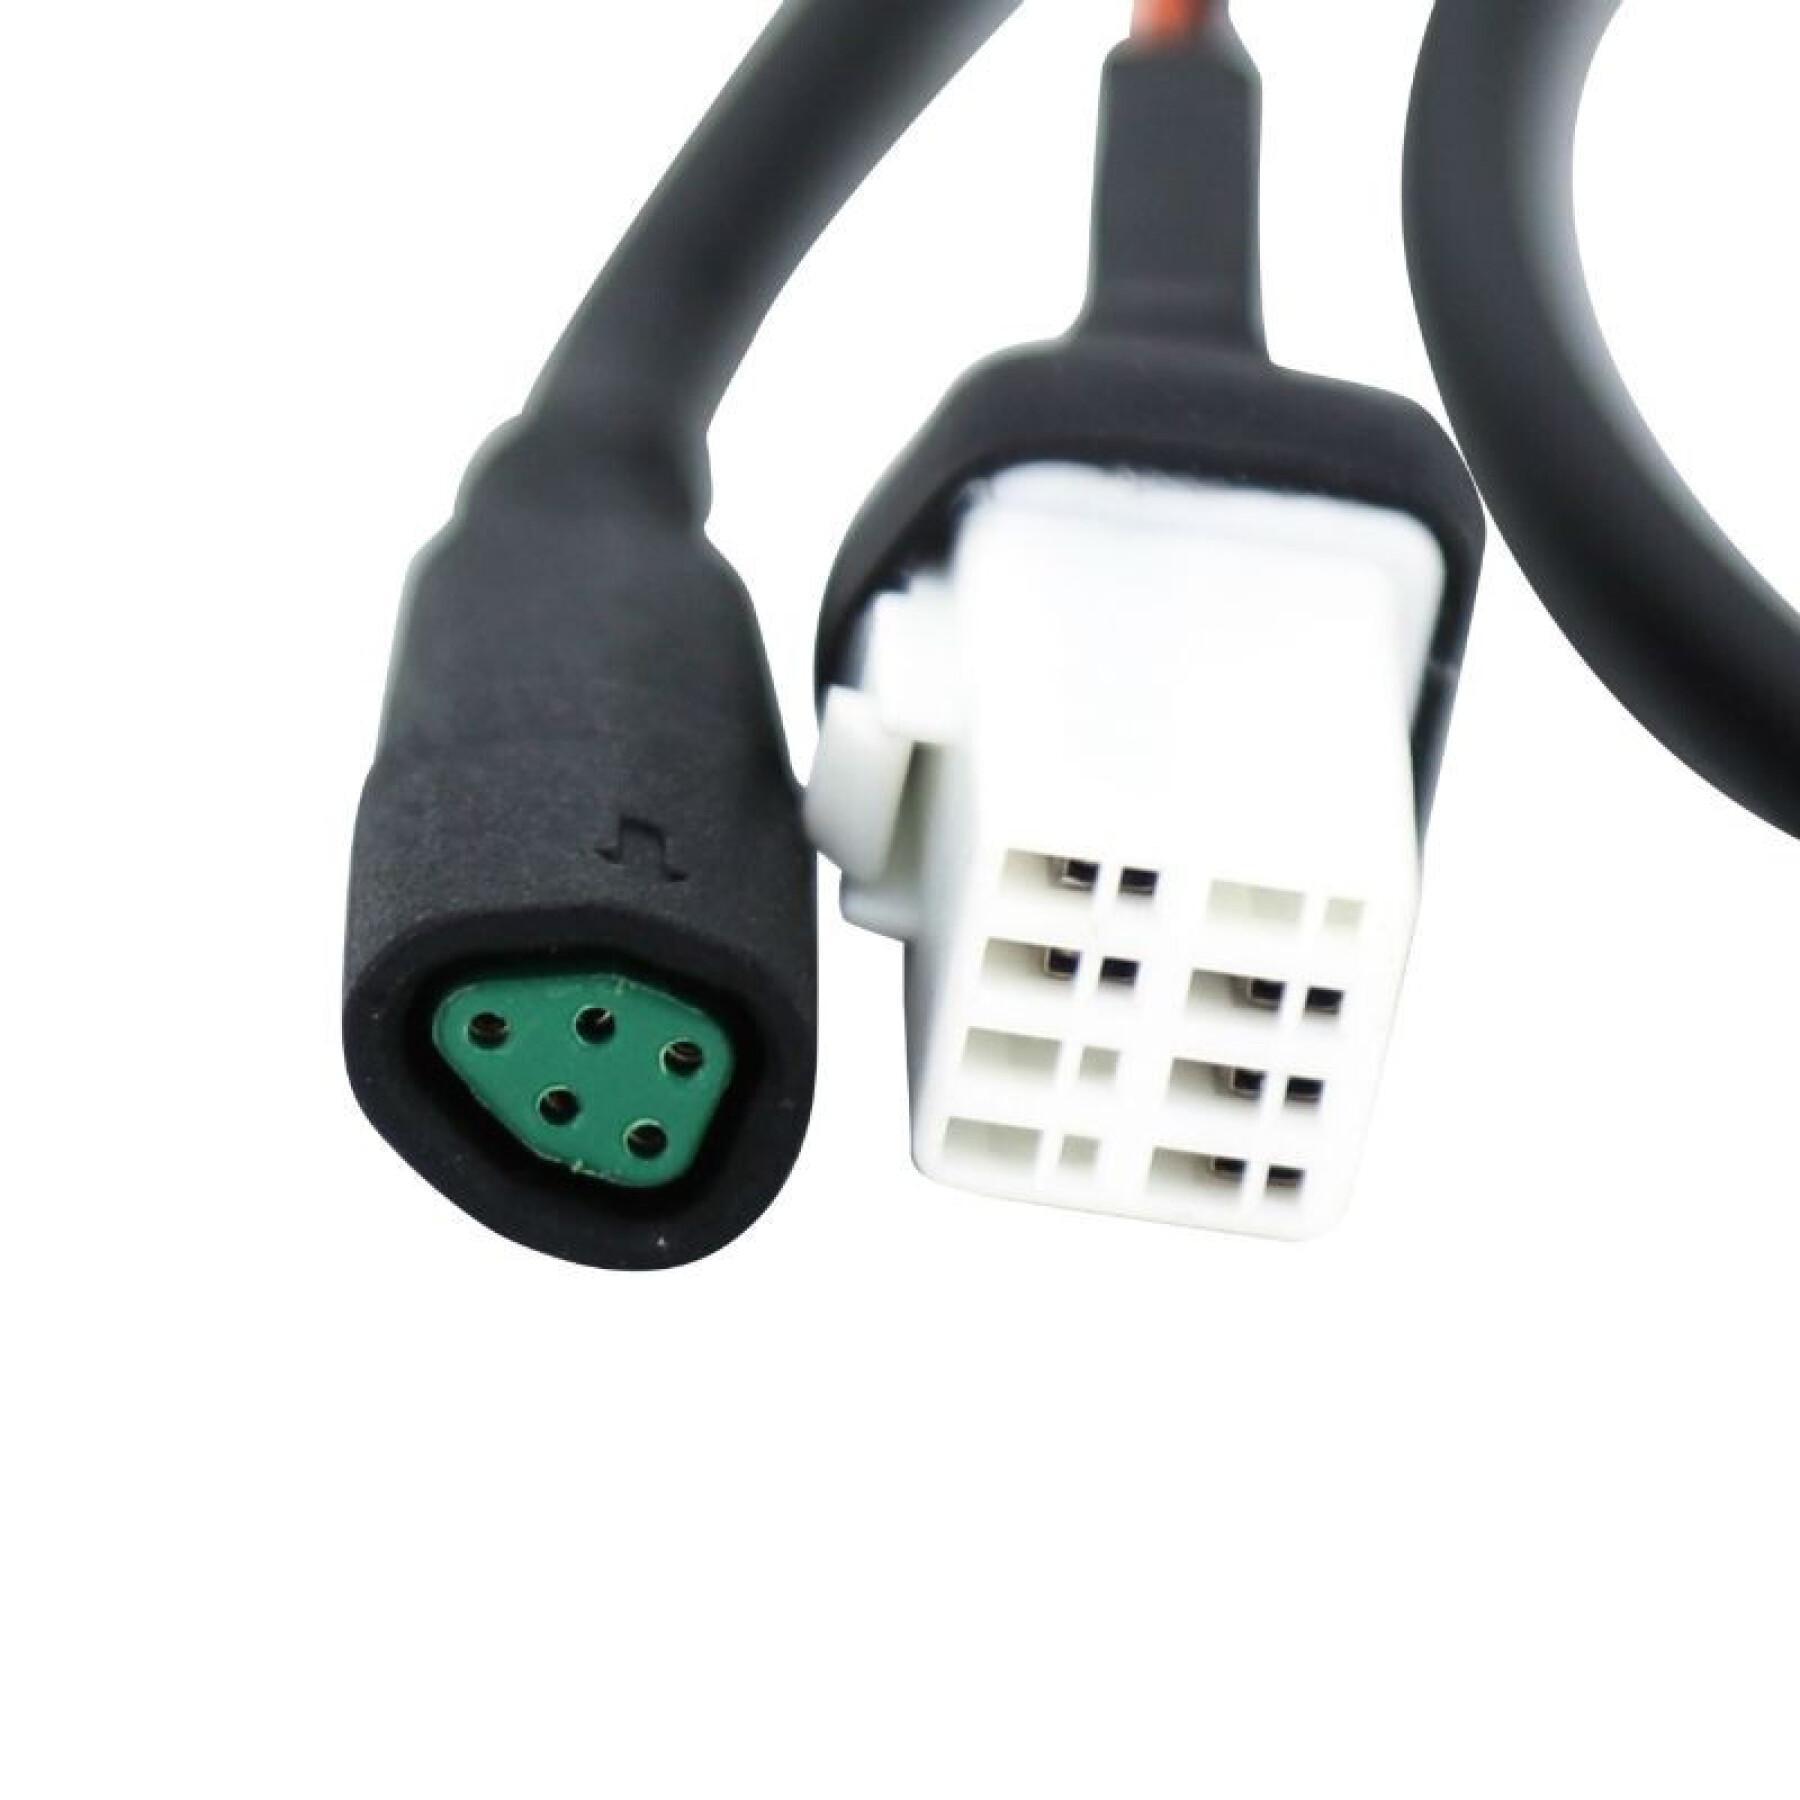 Motor connection cable display 5 pin triangular connector Leader Fox Bafang M420 Can.Bus